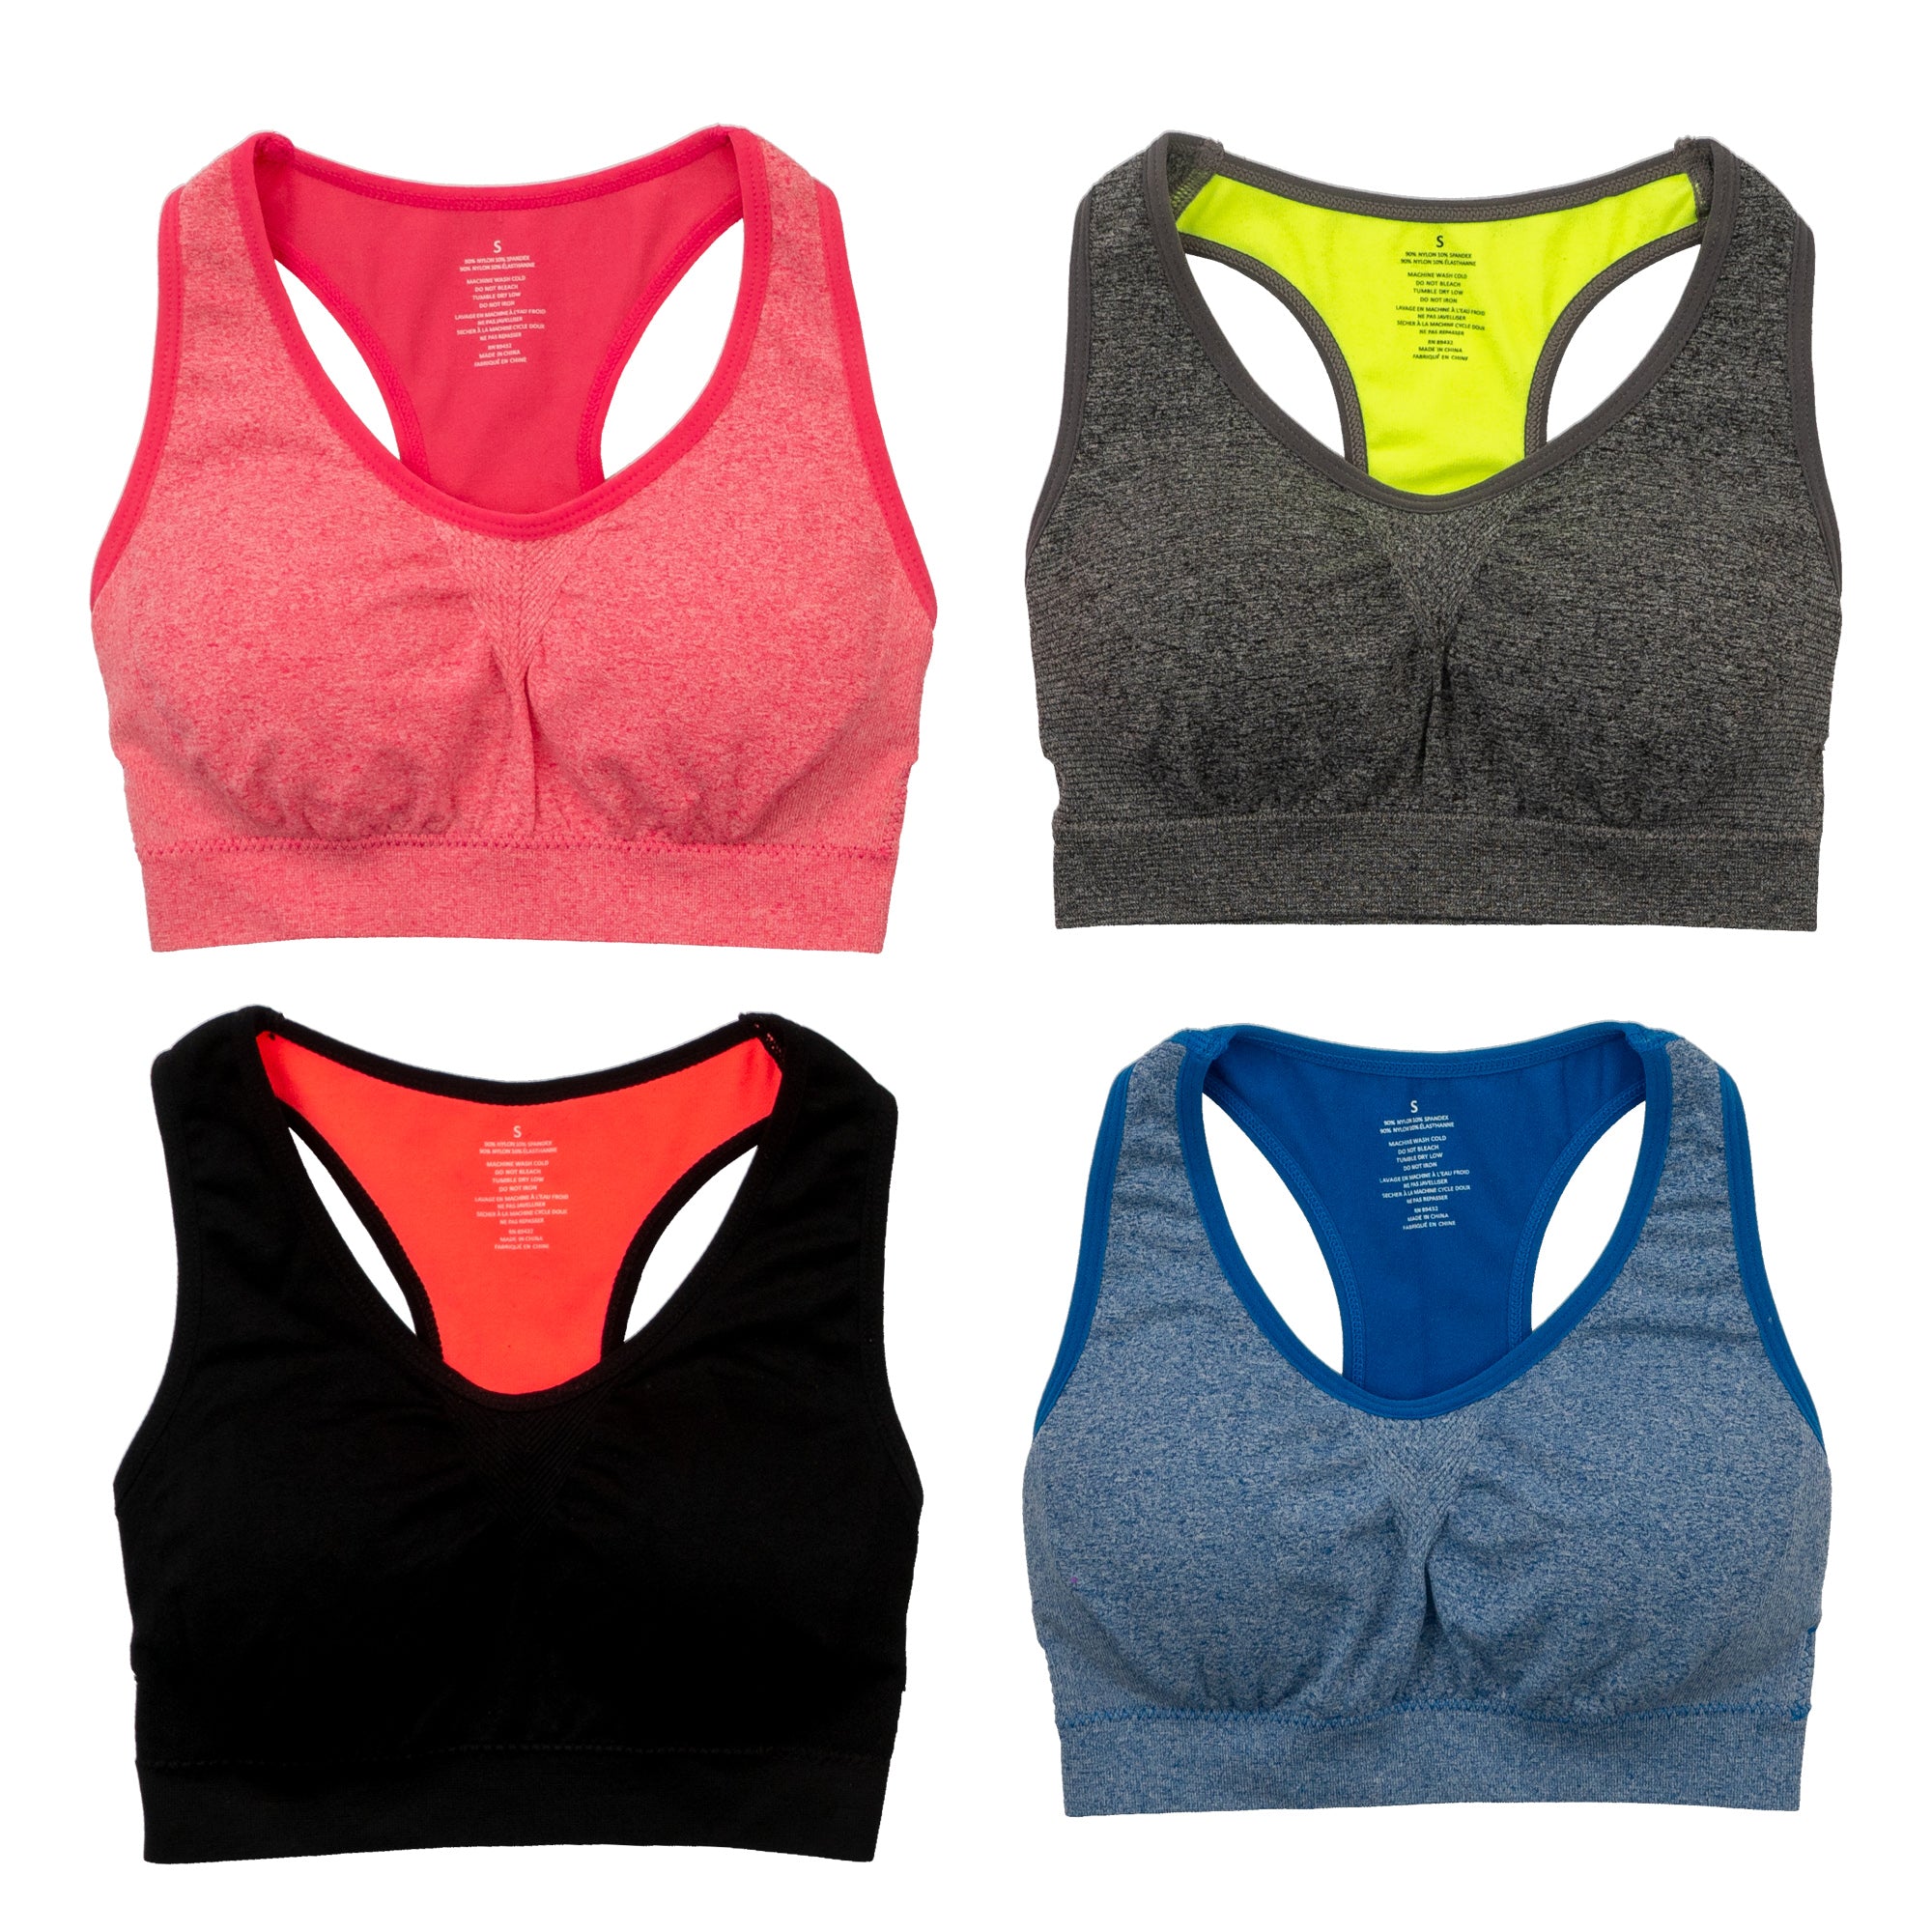 Alyce Ives Intimates Womens Sports Bra, Pack of 4… – alyceives